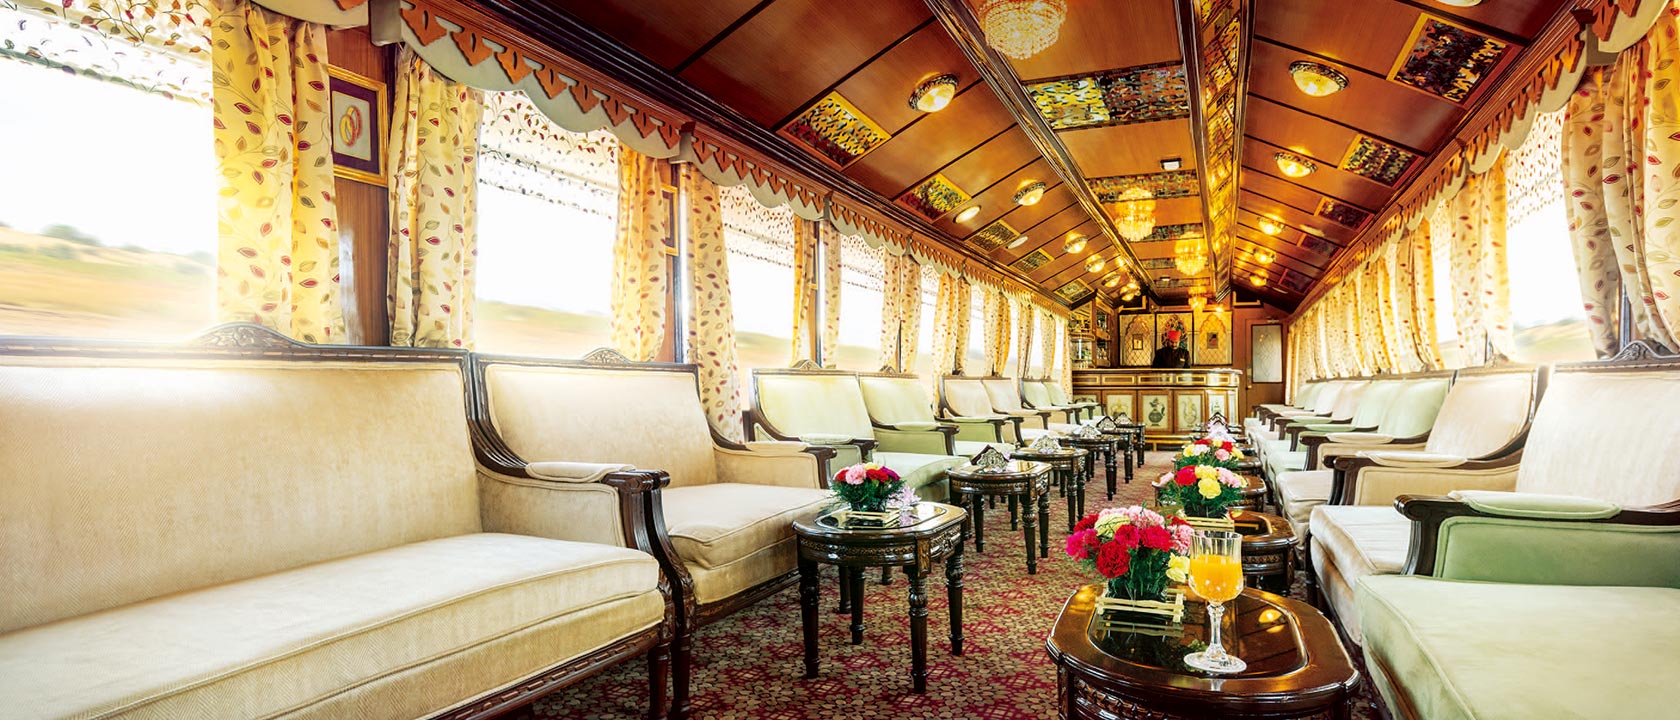 The palace on Wheels - Luxury trains in India